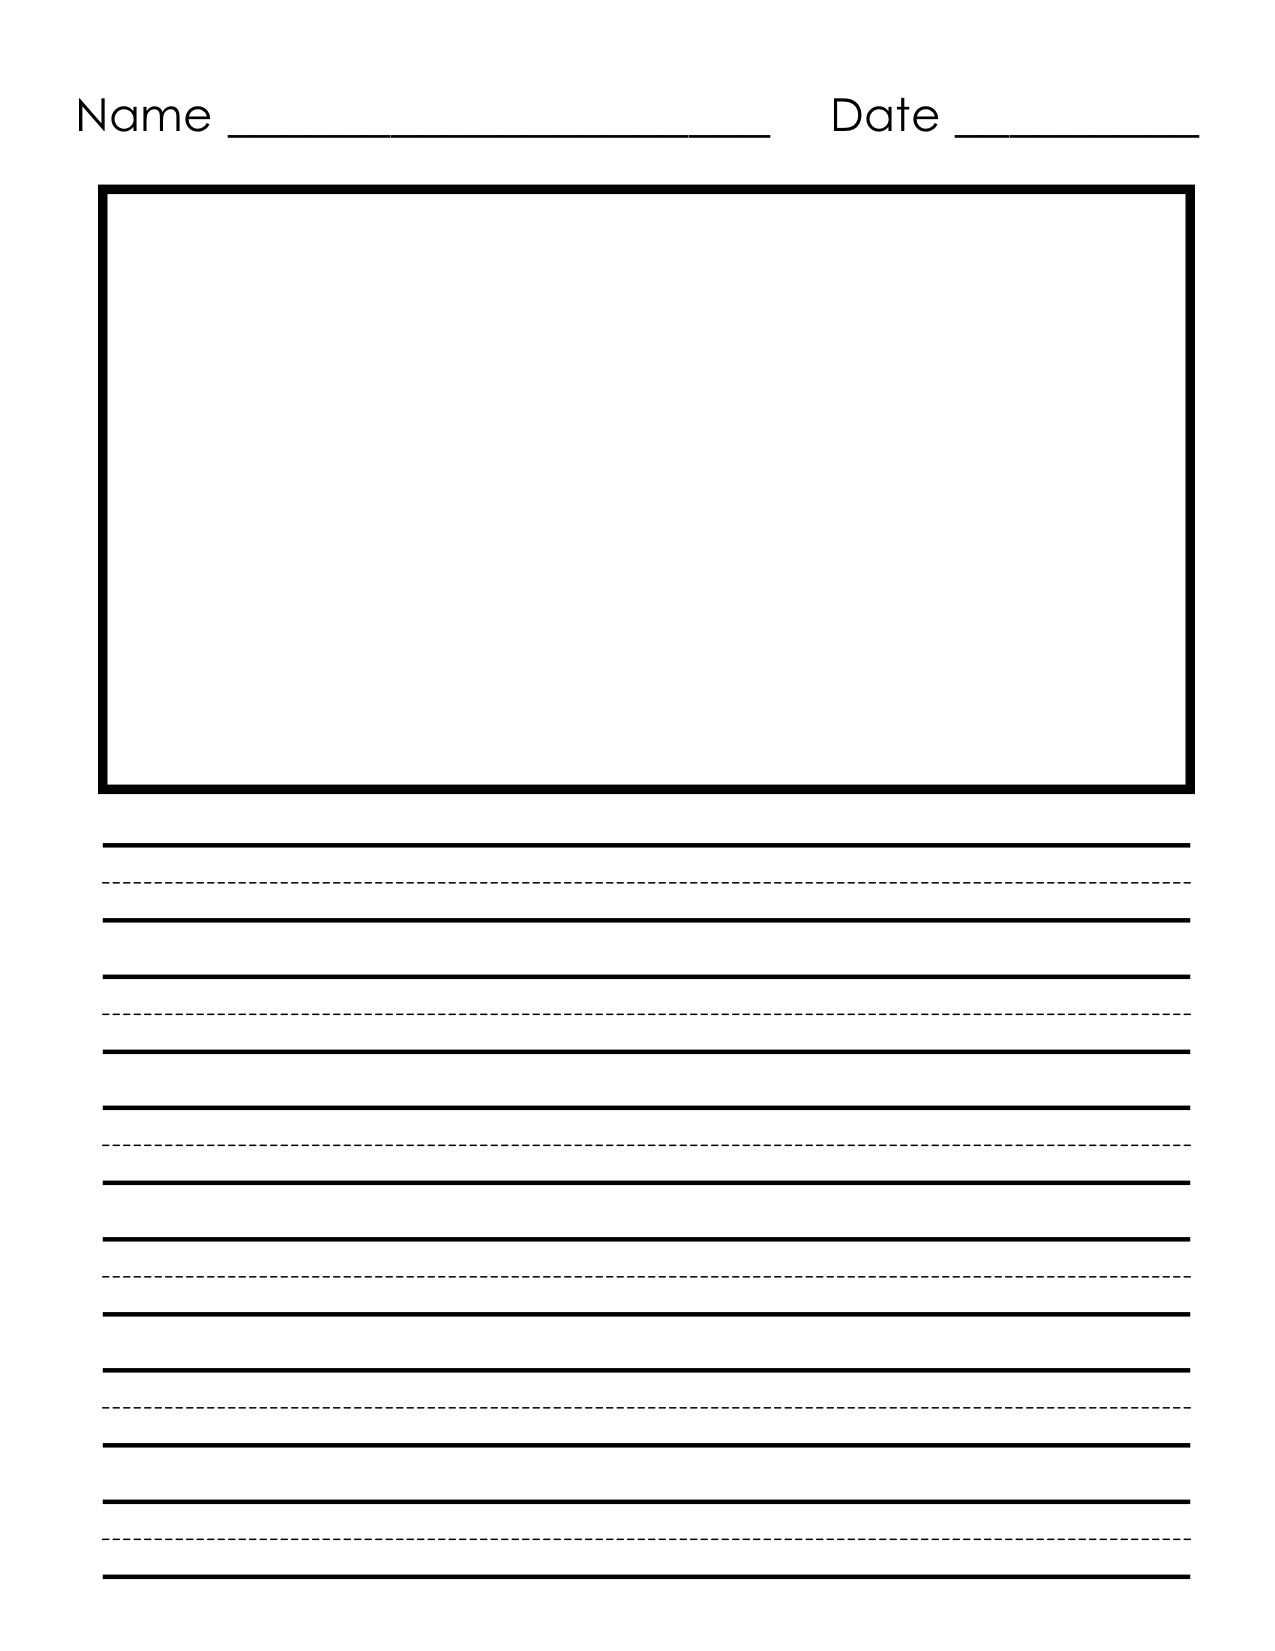 10 Primary Letter Writing Paper | Business Letter Within Blank Letter Writing Template For Kids